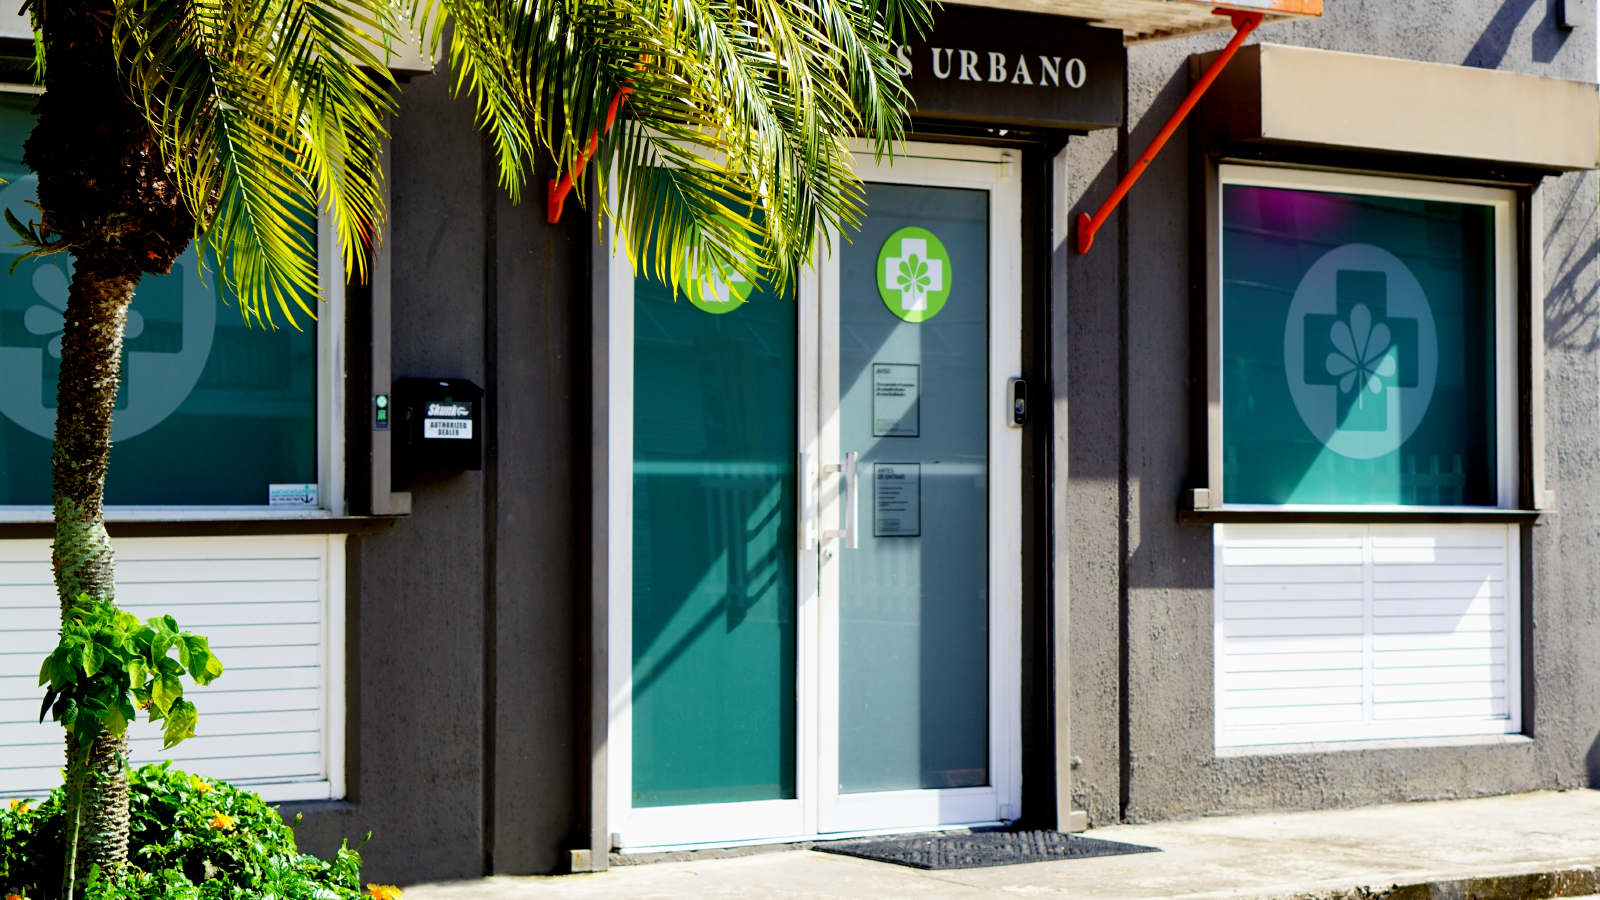 Cush Cannibis Hato Rey Store front